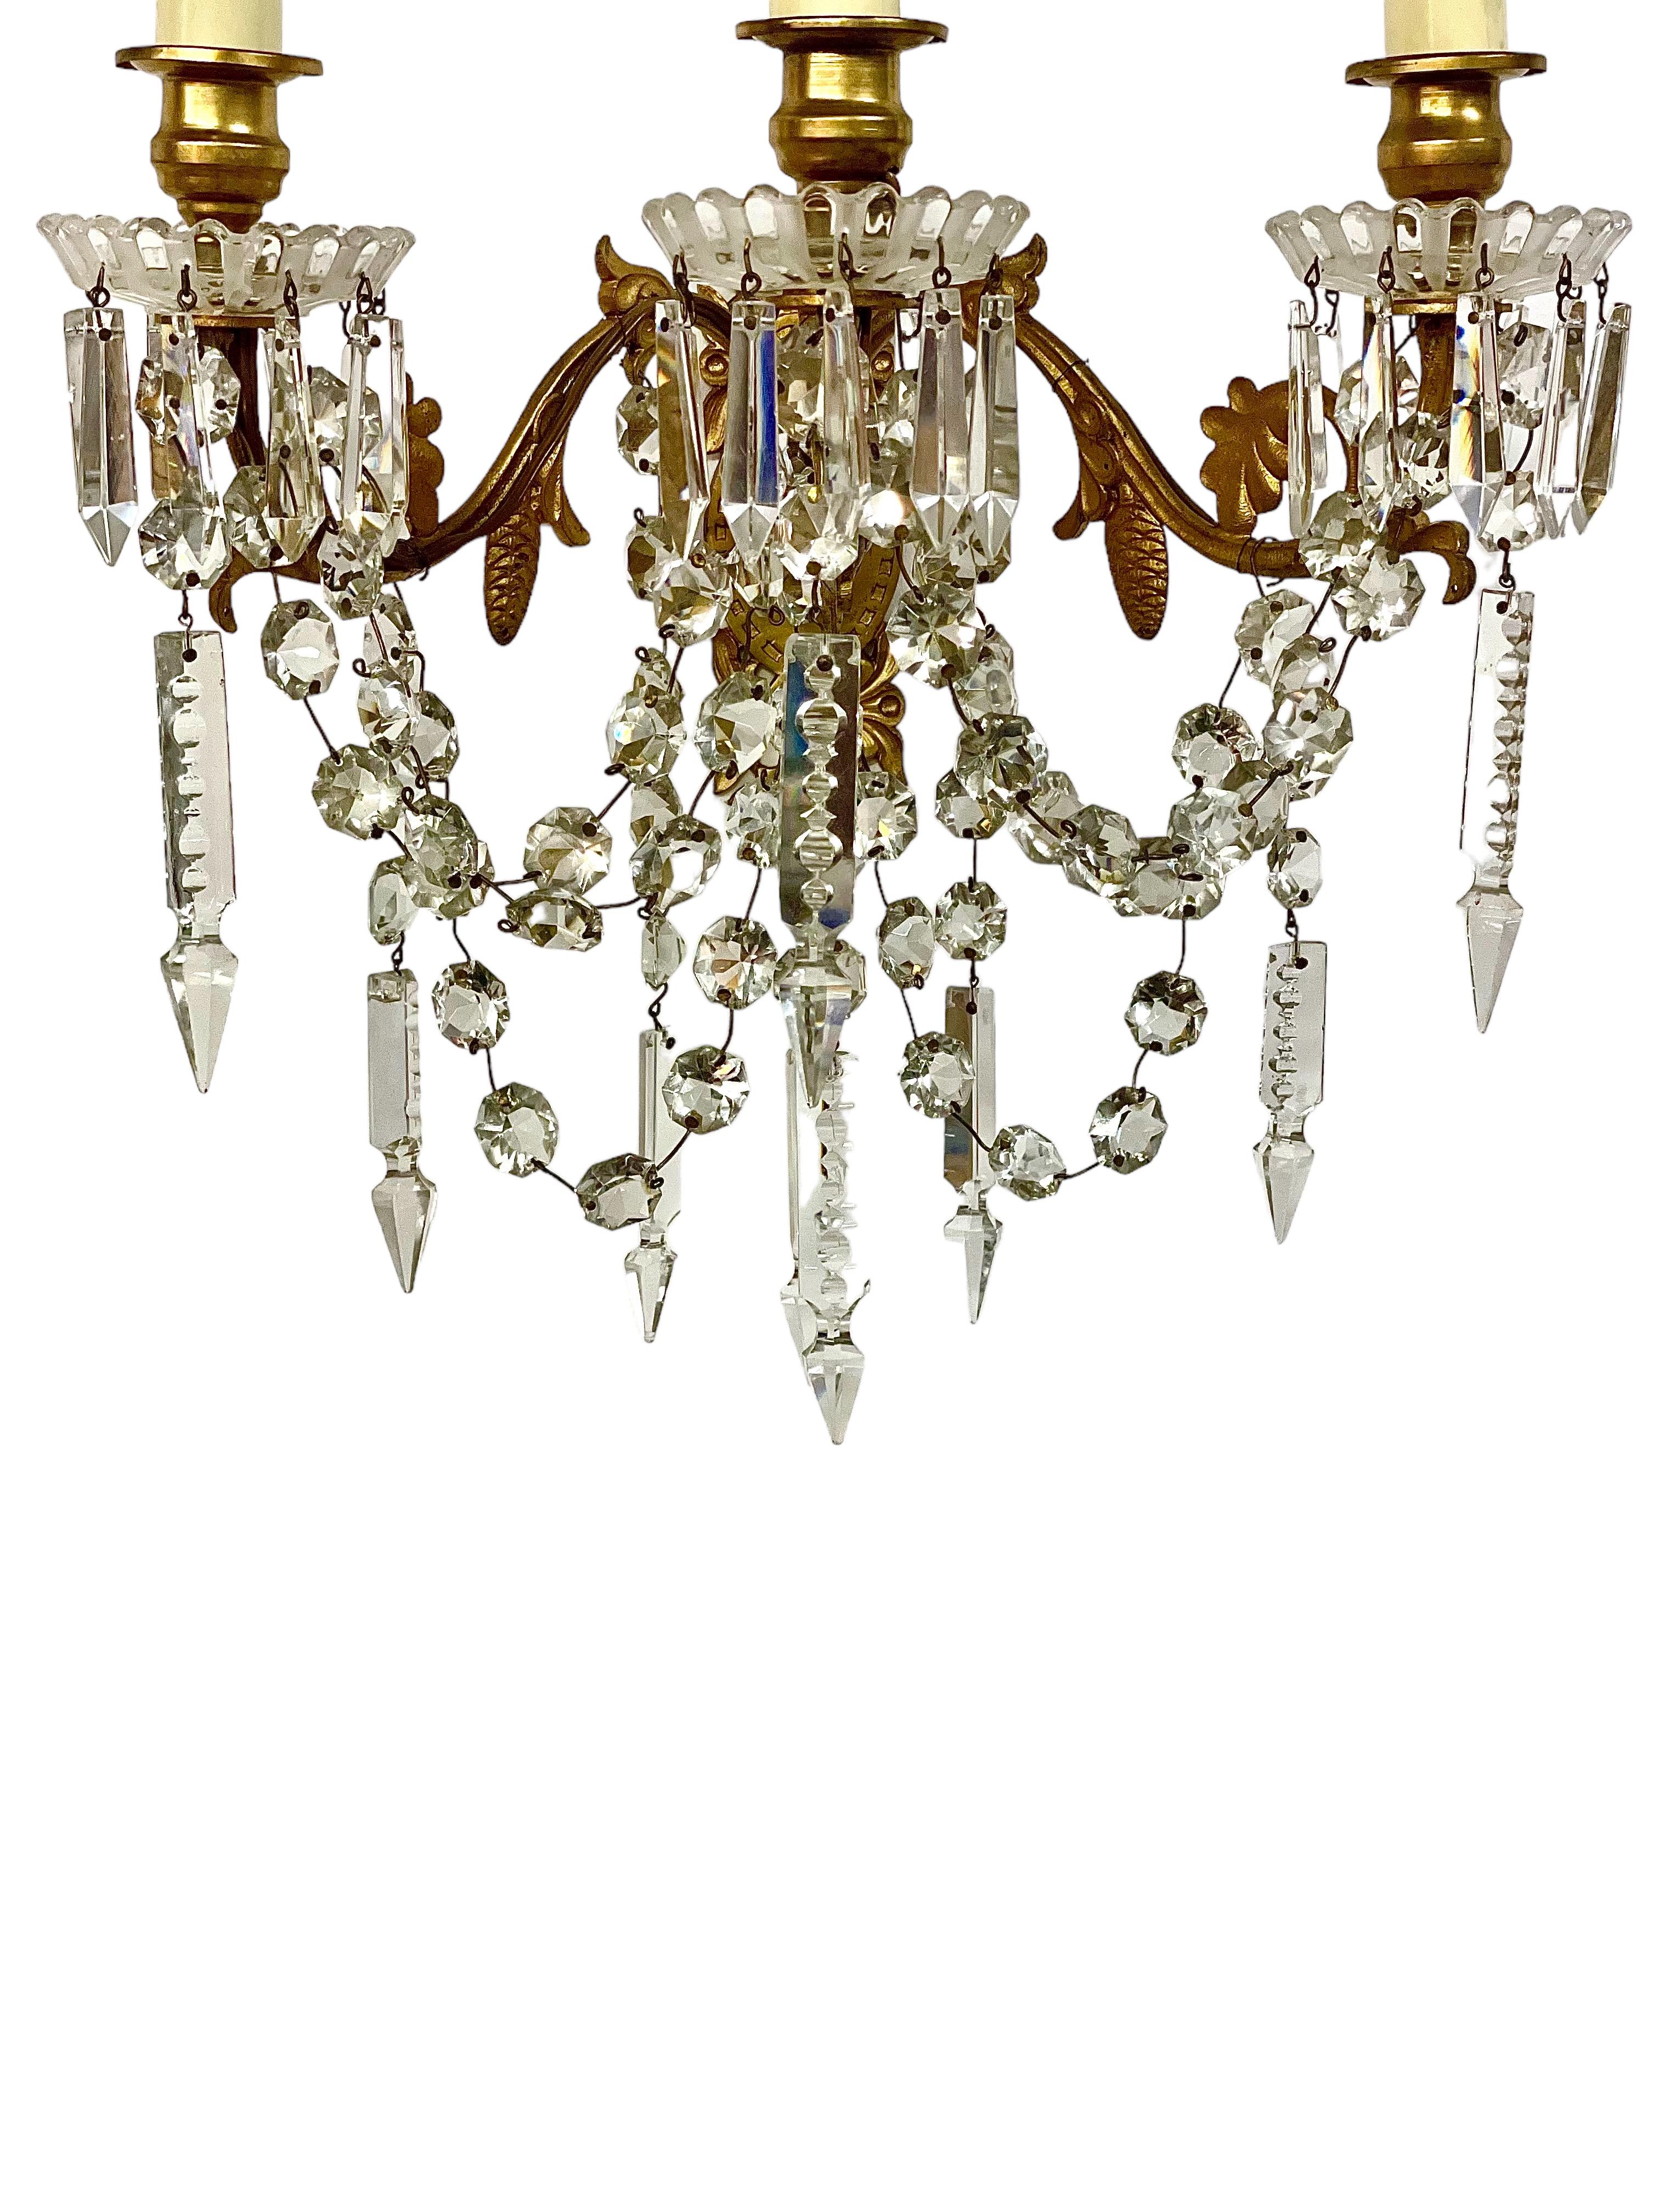 19th Century Pair of Baccarat Wall Sconces in Gilt Bronze and Crystal For Sale 5